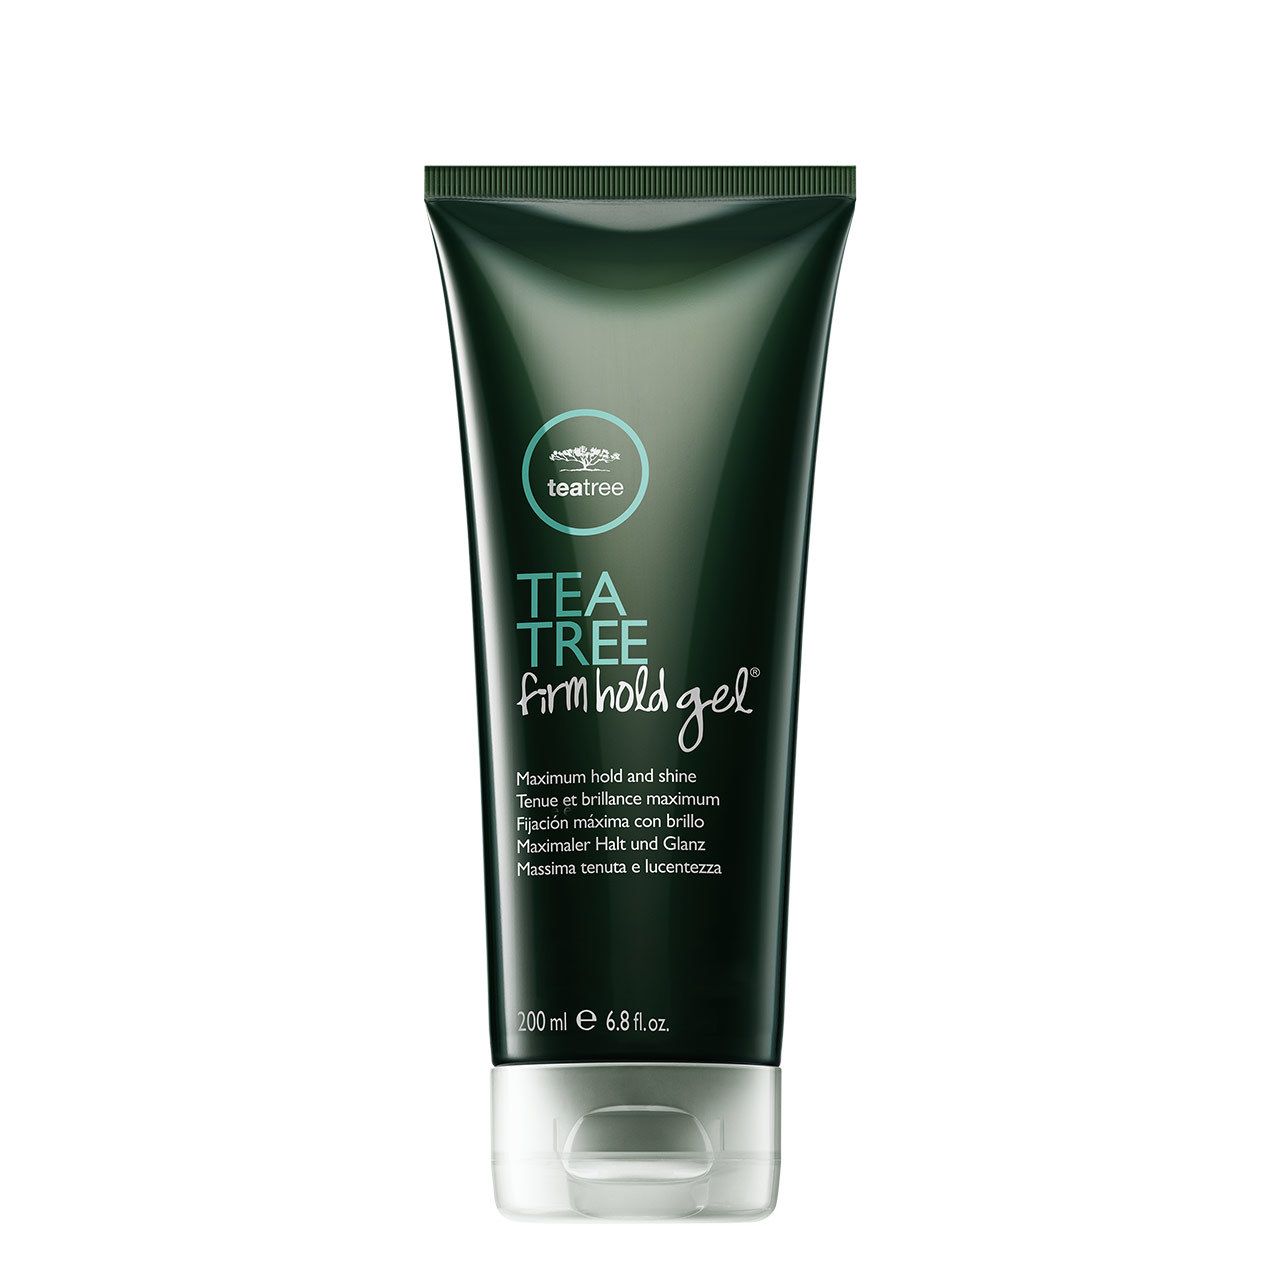 Tea Tree Firm Hold Gel by Paul Mitchell